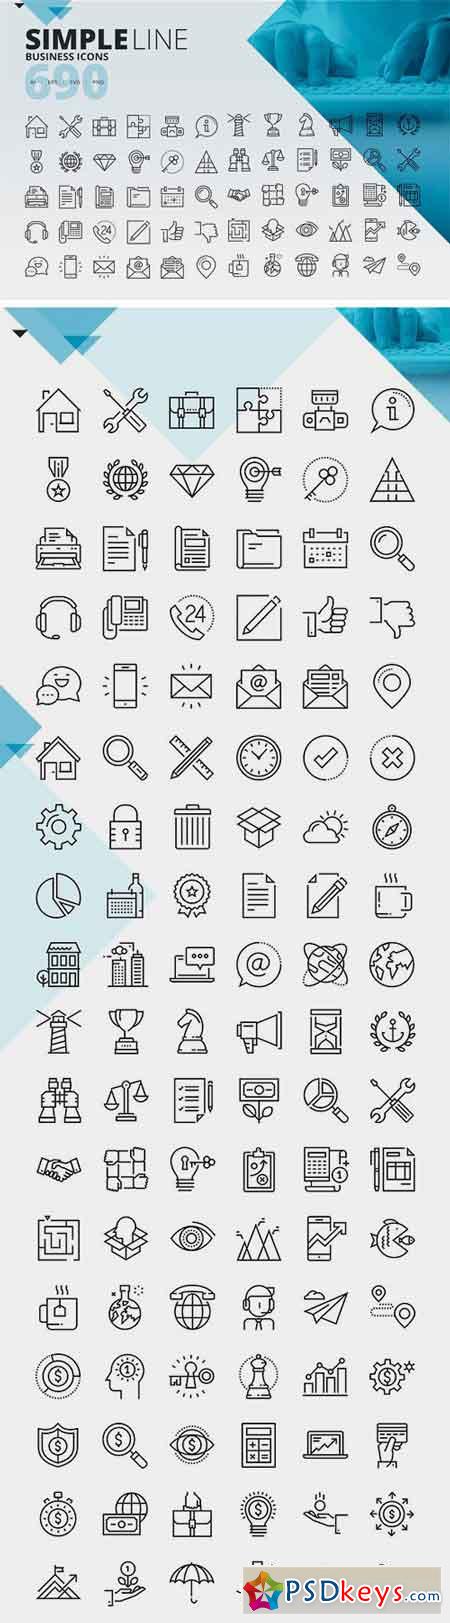 SIMPLE ICONS 1213293